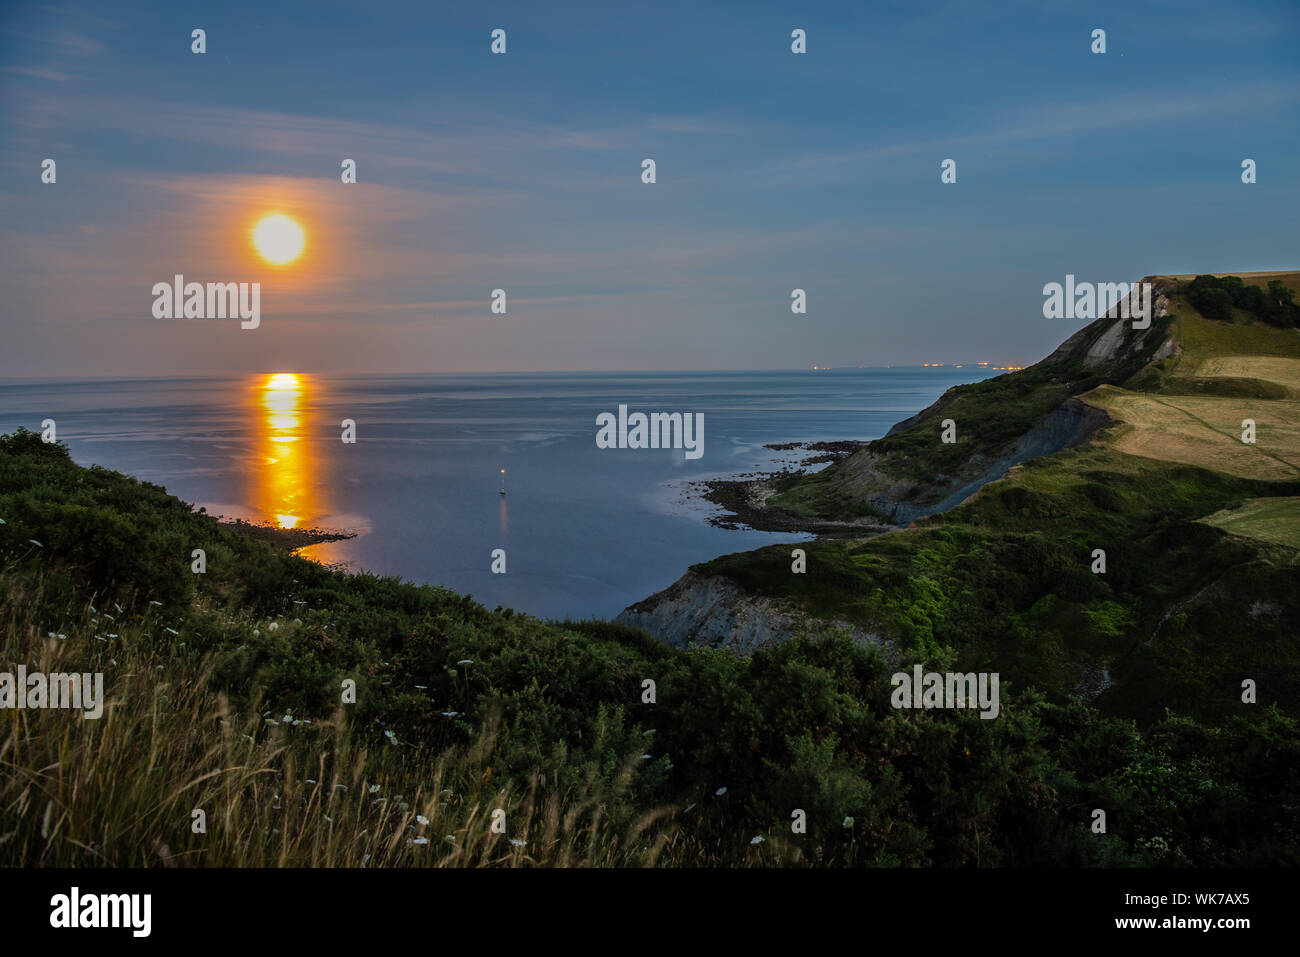 View of the moon setting at Chapman's pool from the cliff top. Stock Photo